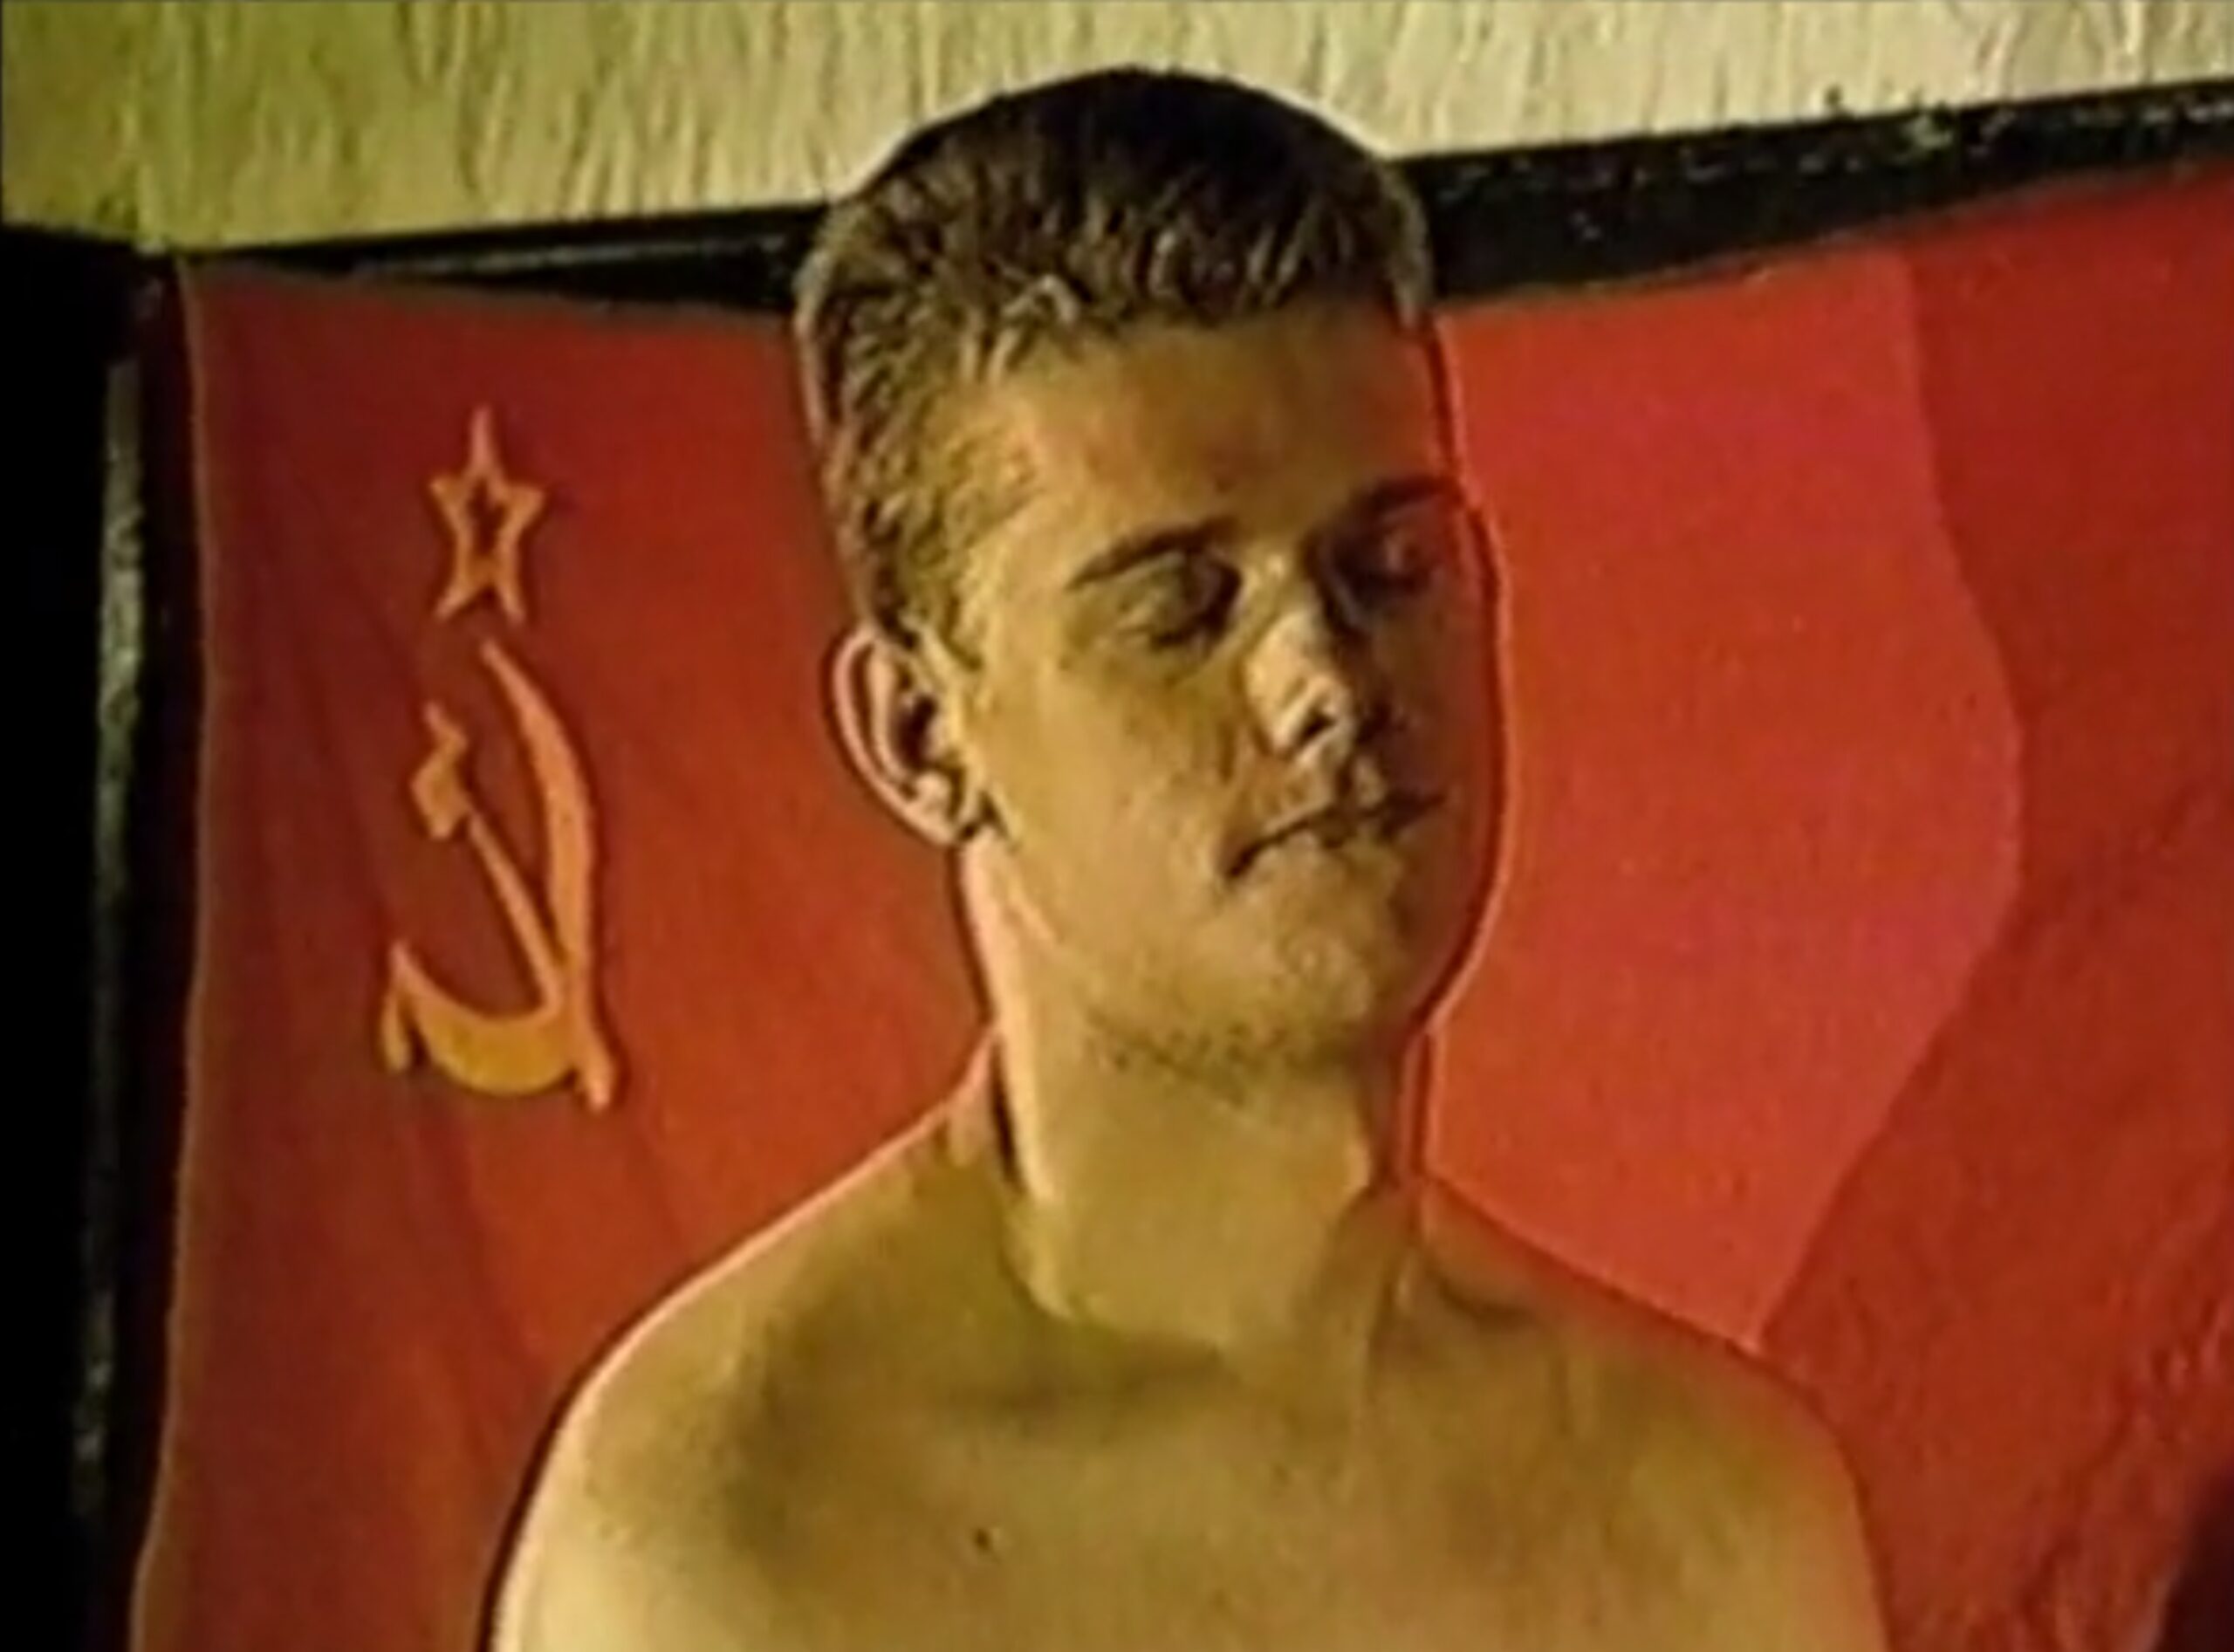 The Fall of Communism as Seen in Gay Pornography